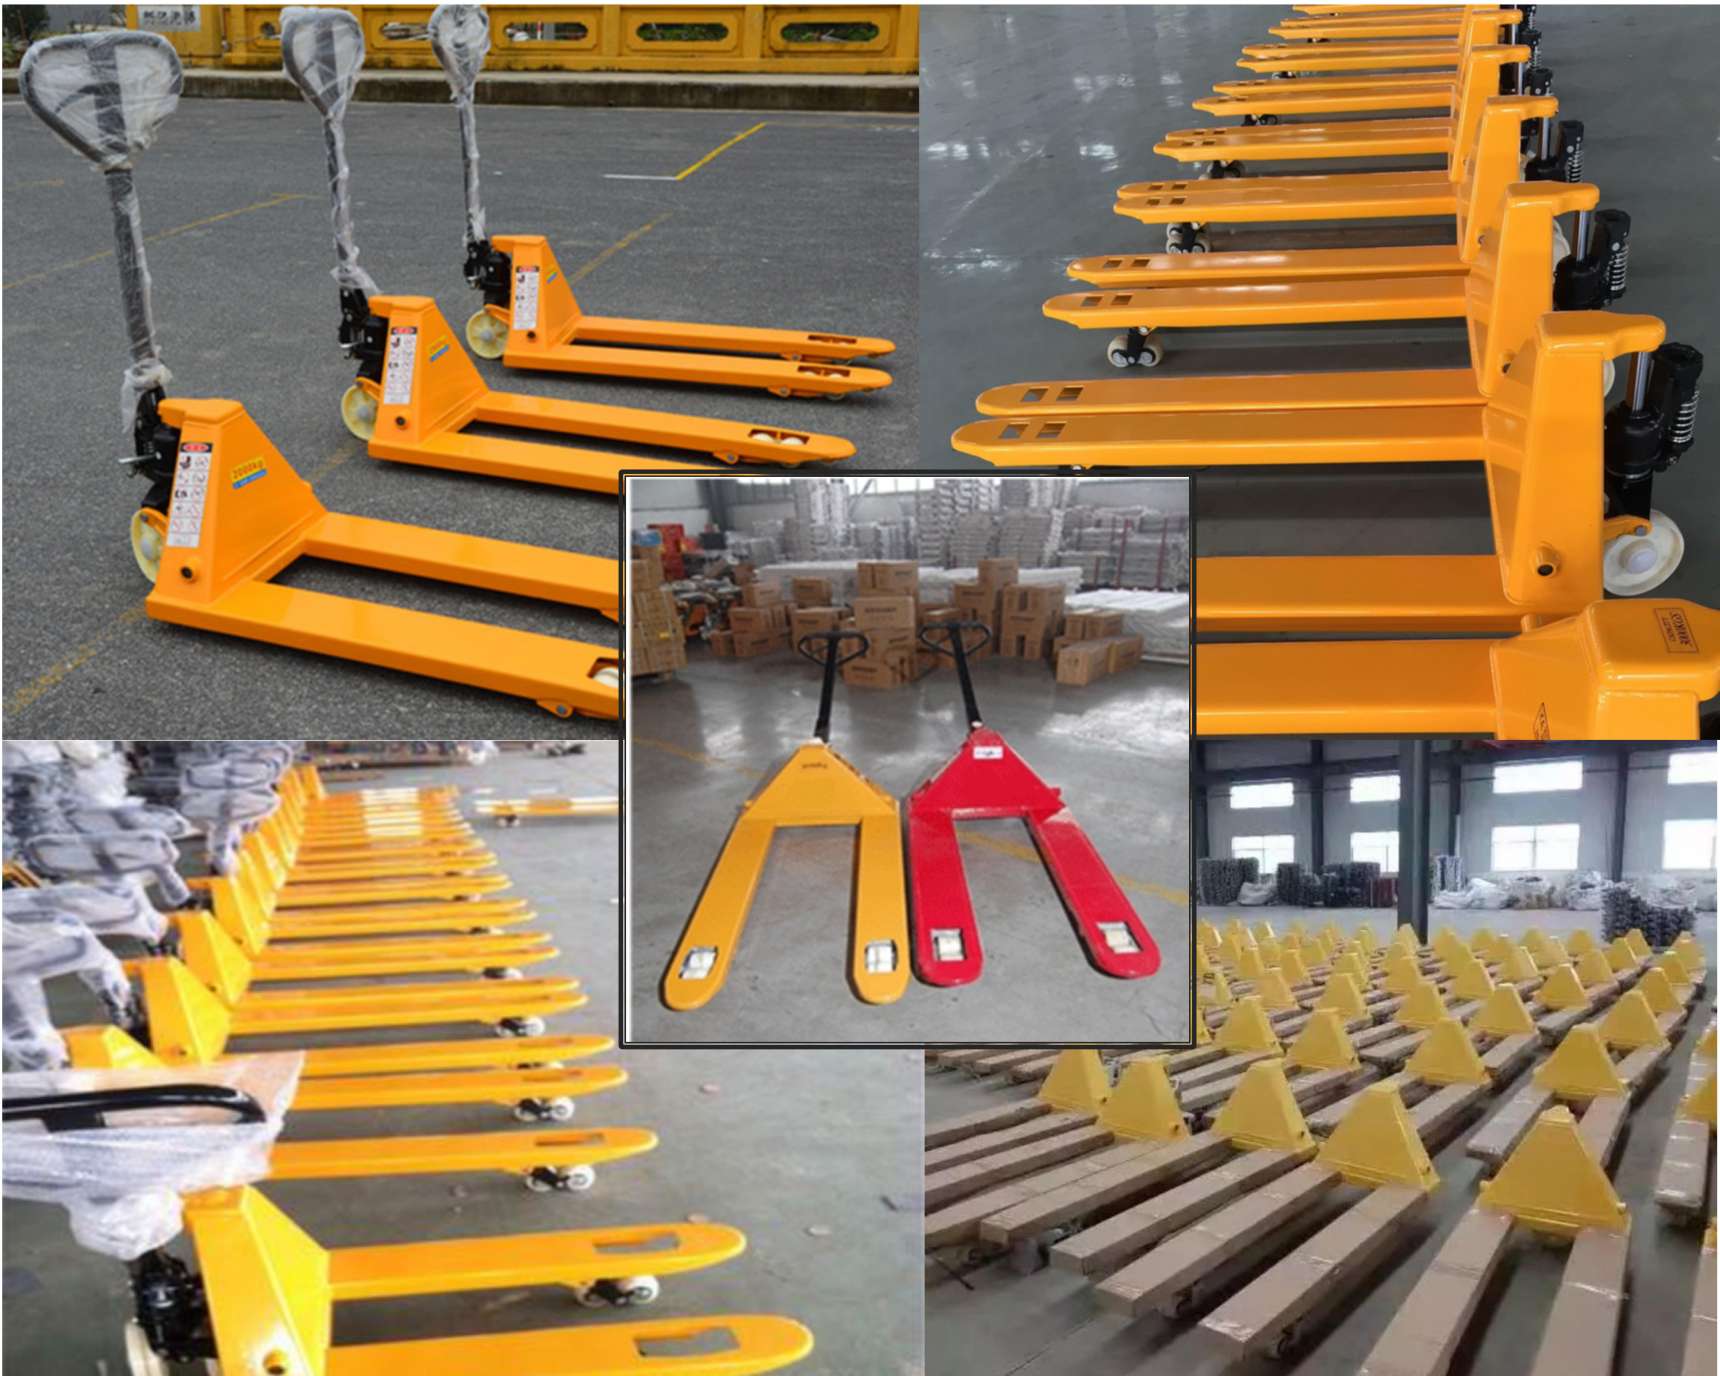 High quality China 2MT Warehouse Double Pressure Relief hand lift hydraulic Hand Pallet Truck